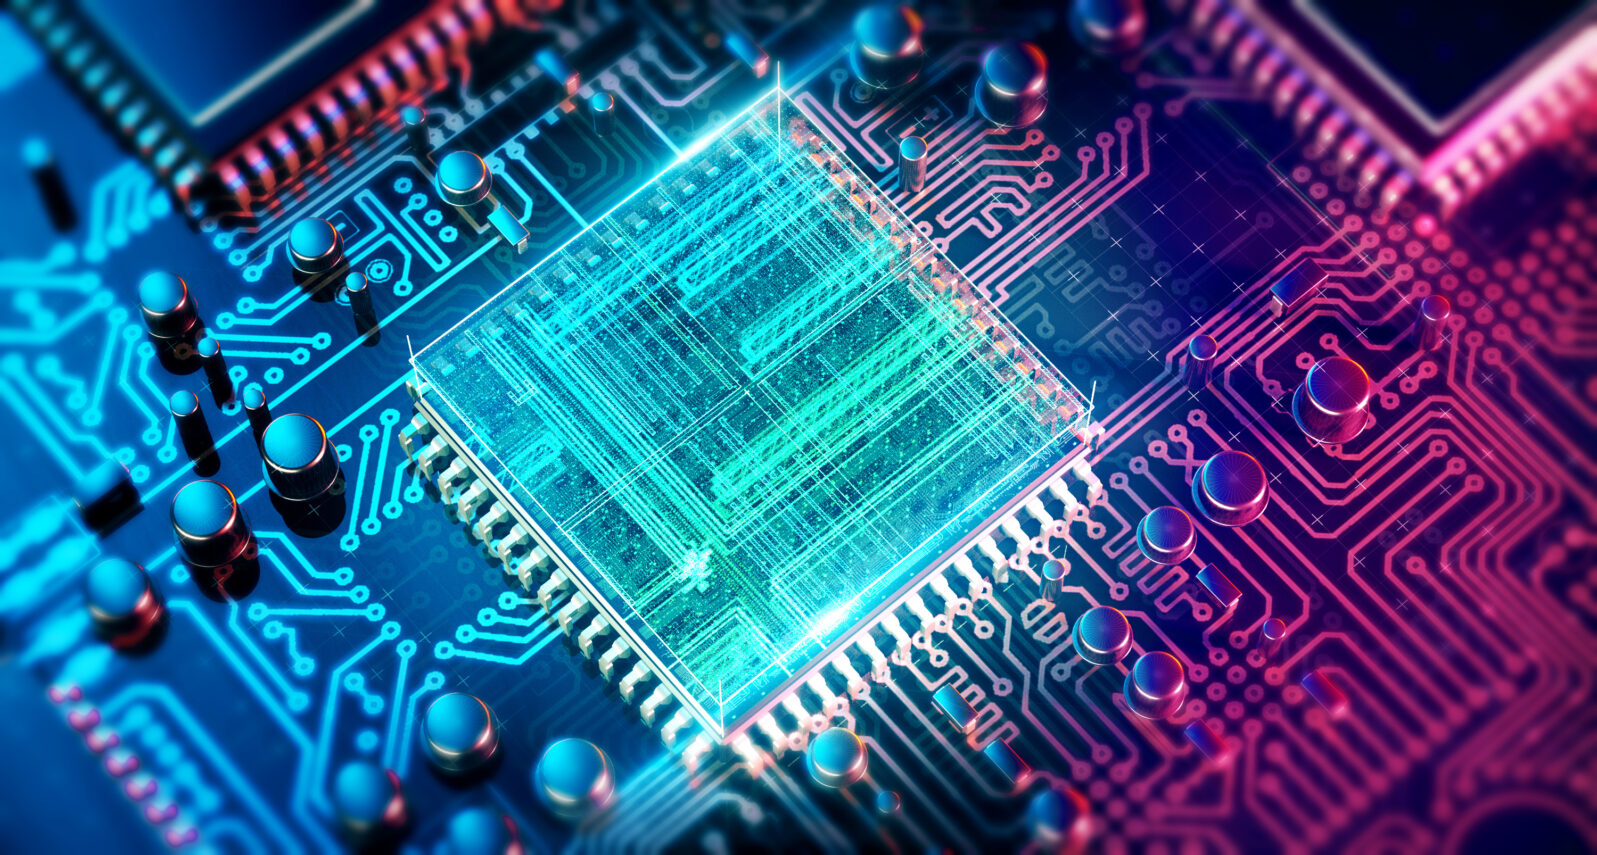 Circuit board. Electronic computer hardware technology. Motherboard digital chip. Tech science EDA background. Integrated communication processor. Information CPU engineering 3D render background